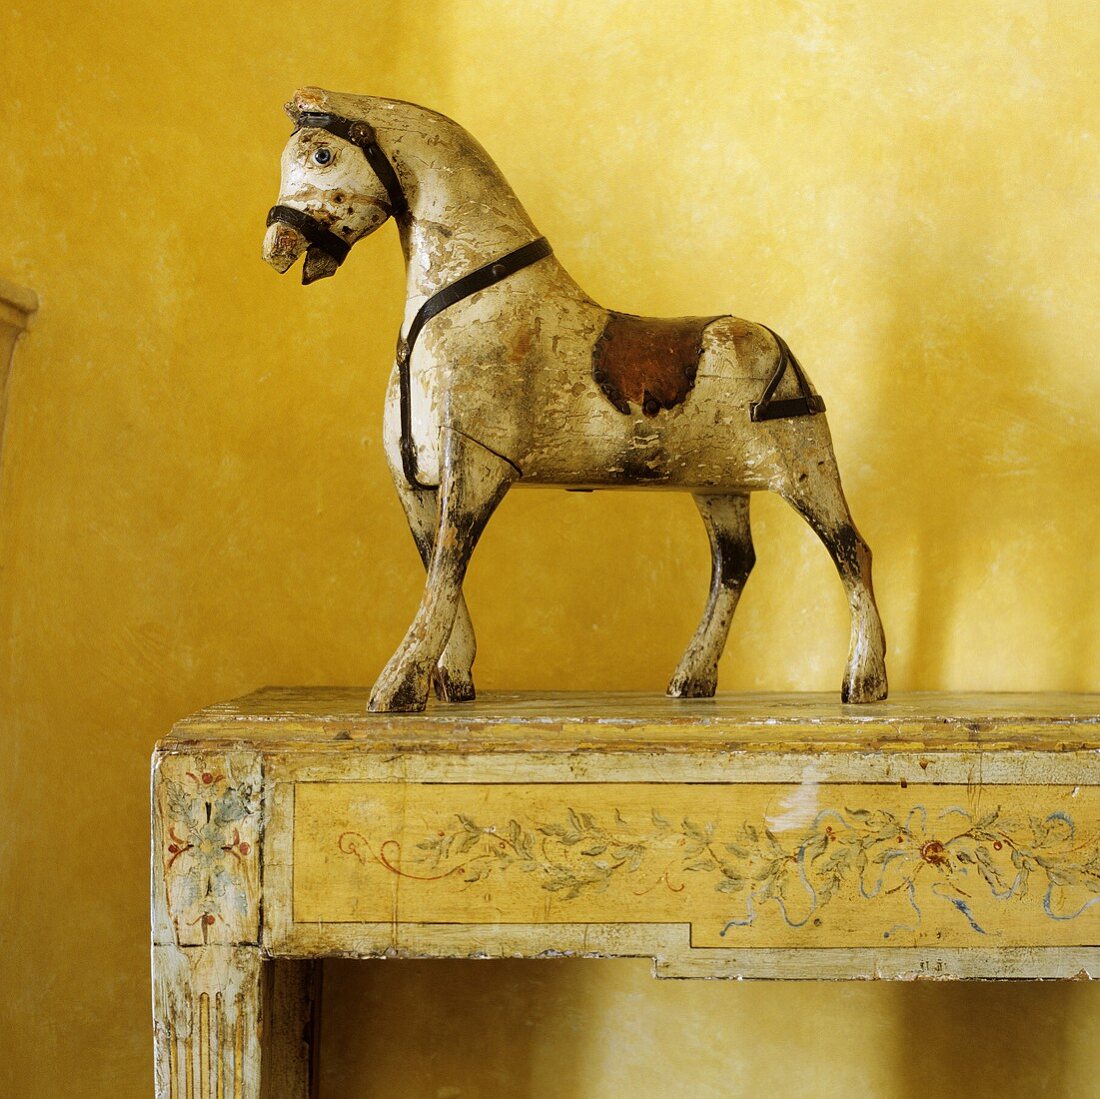 A painted wooden horse on a wooden console in front of a yellow wall